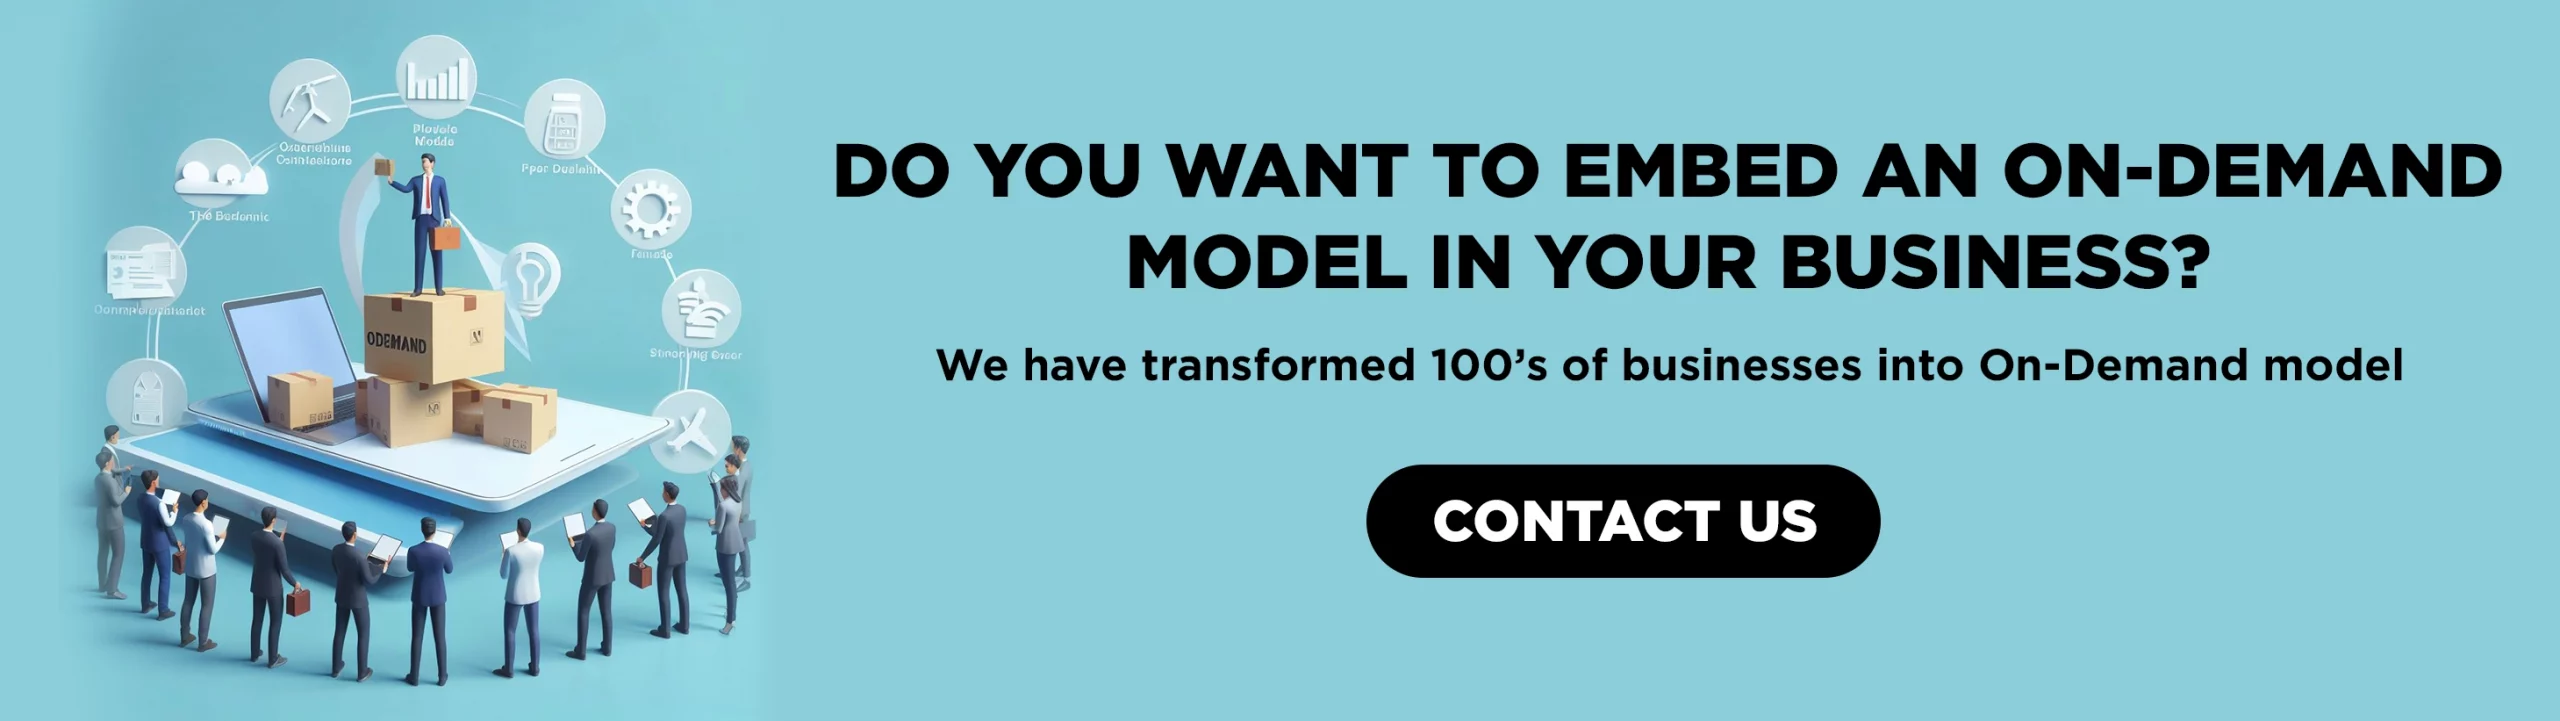 On-Demand model in your business